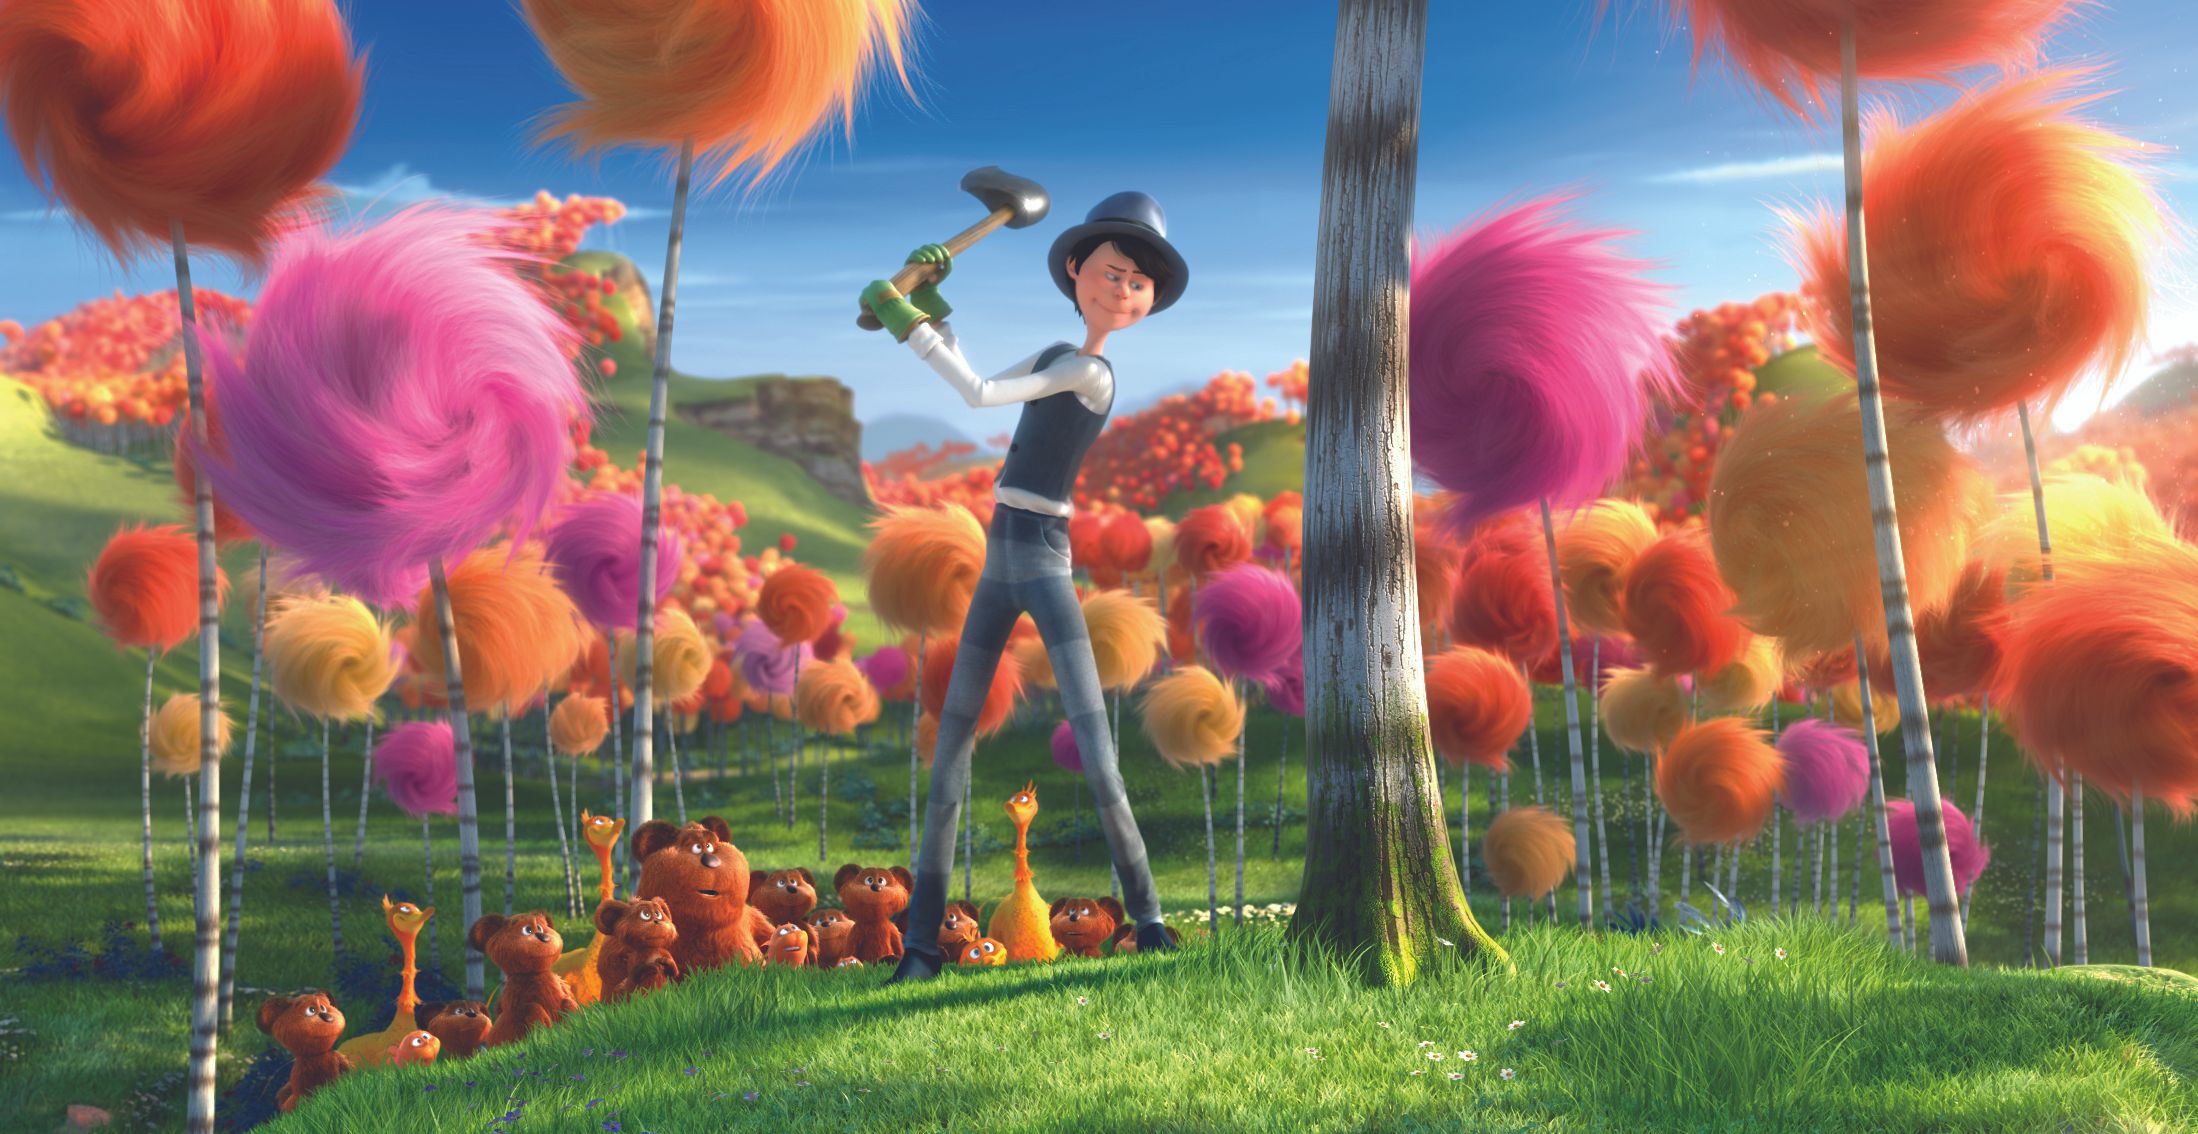 THE LORAX Movie Trailer and Images